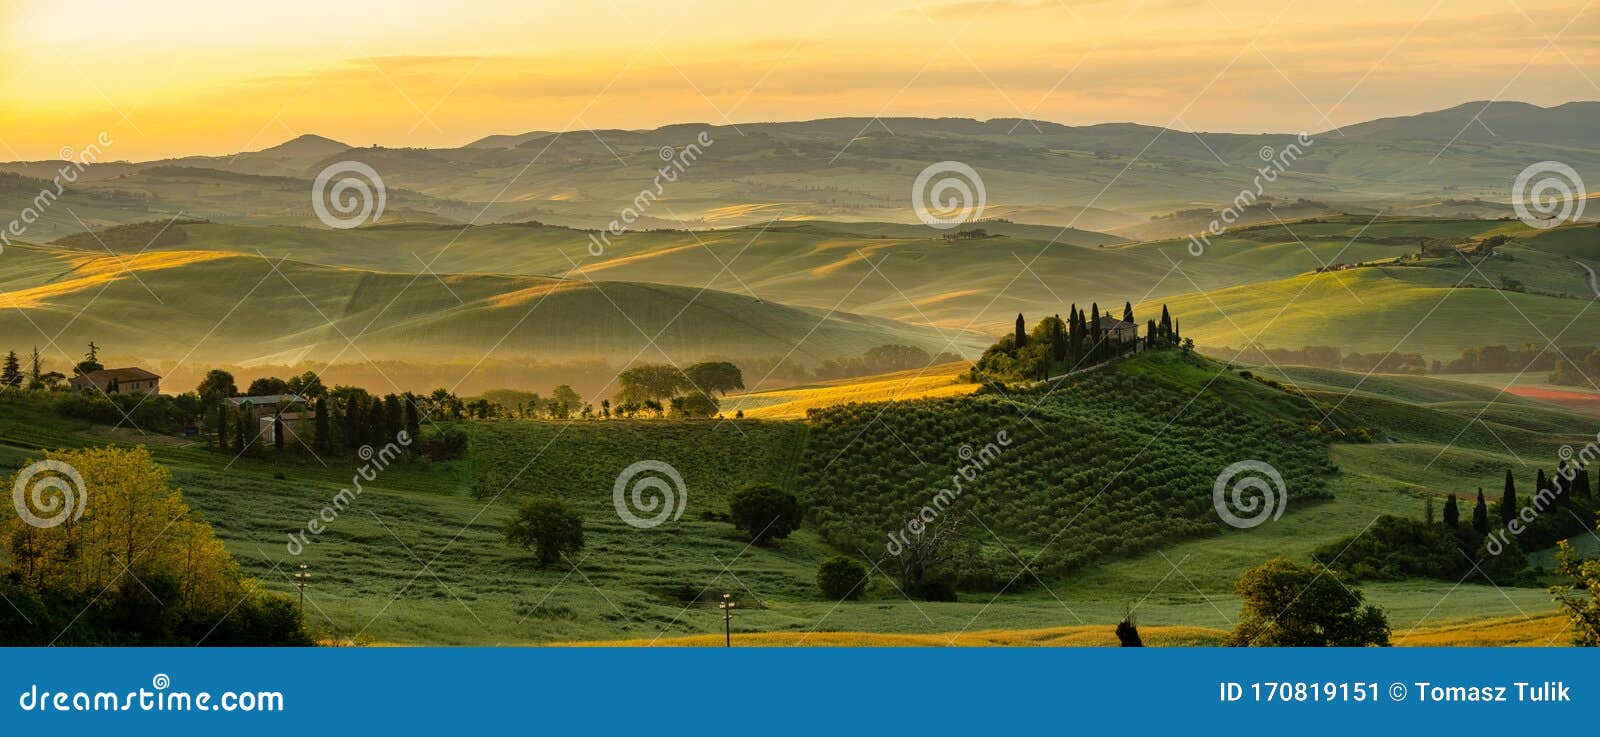 tuscany - landscape panorama, hills and meadow, toscana - italy